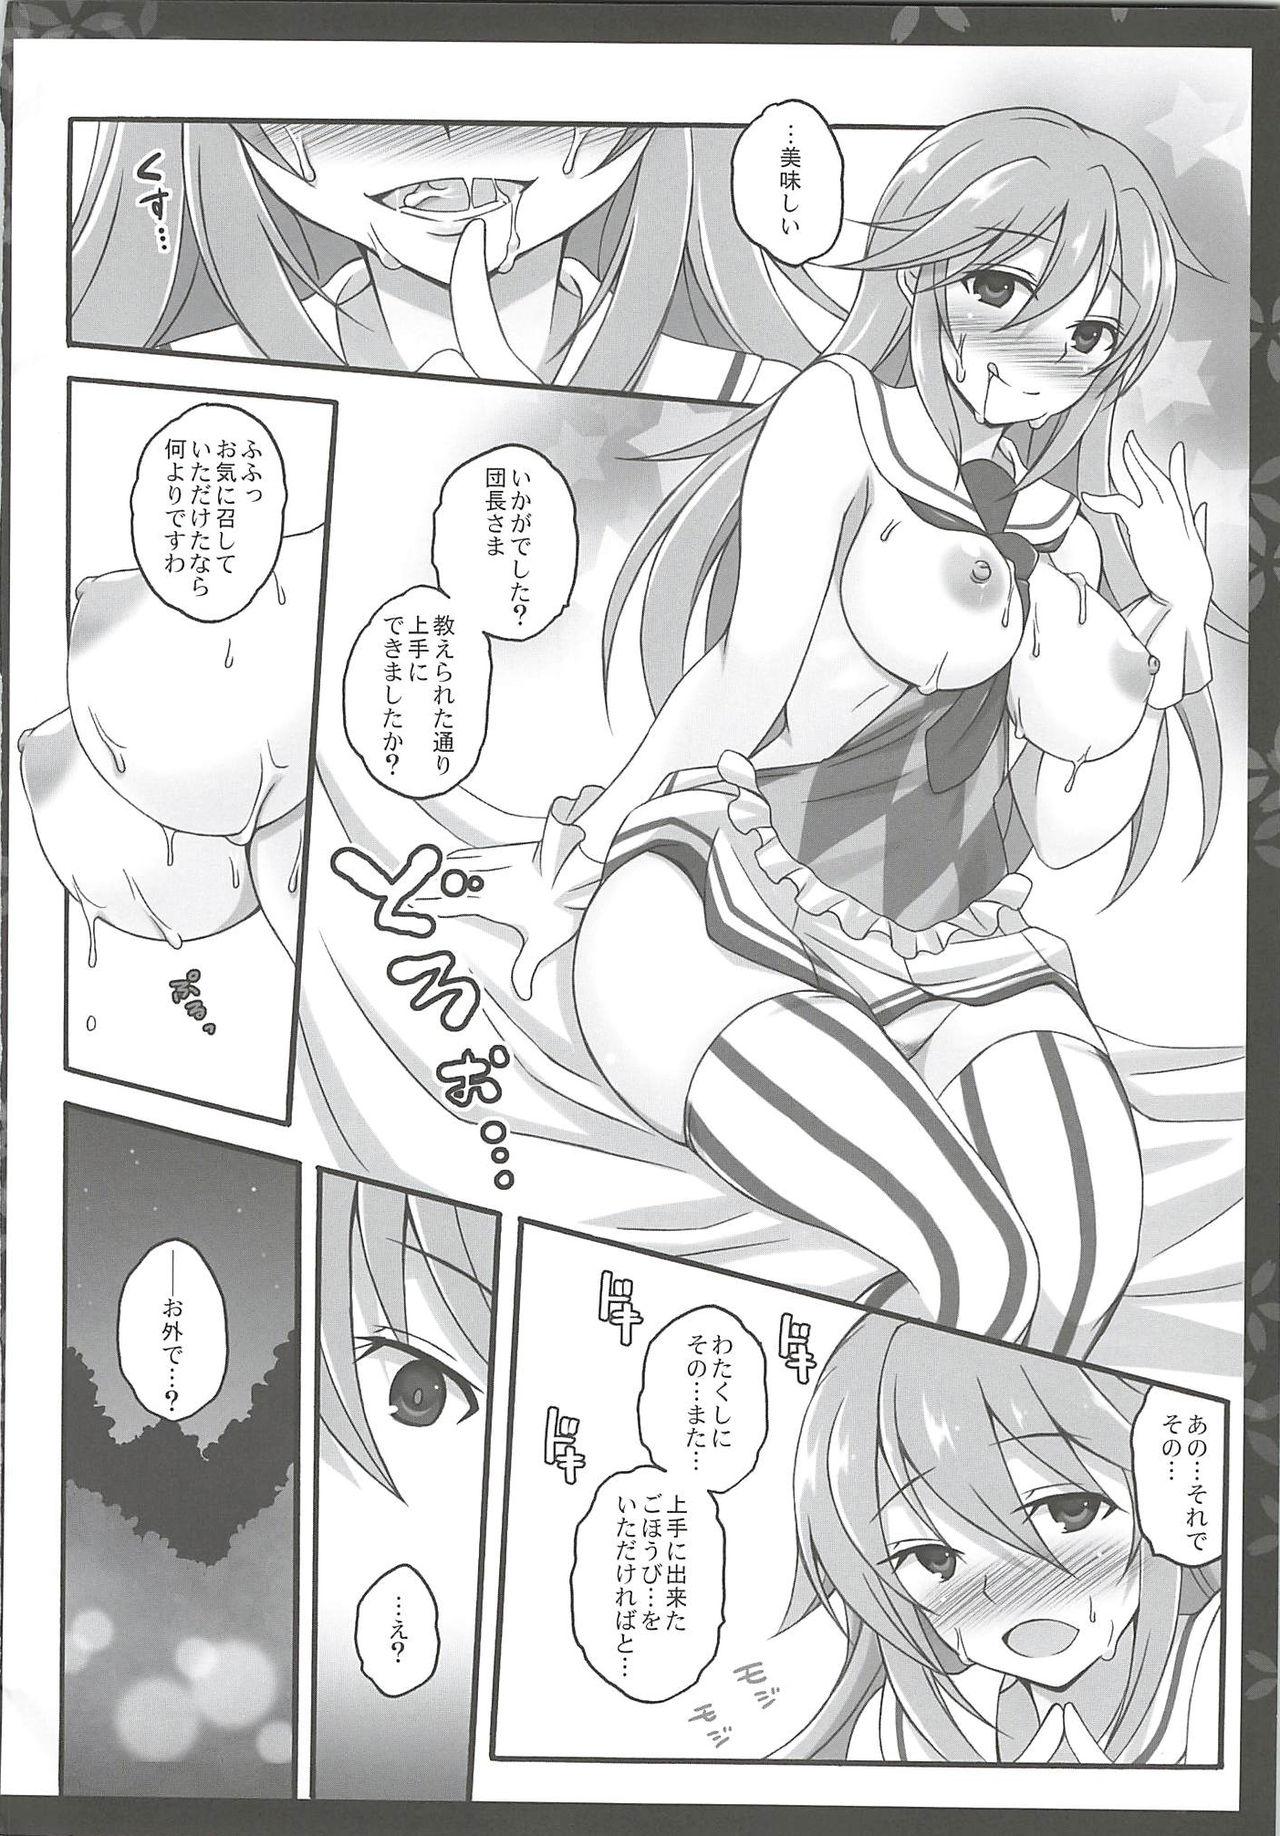 Gozada Melt Royal - Flower knight girl Role Play - Page 6